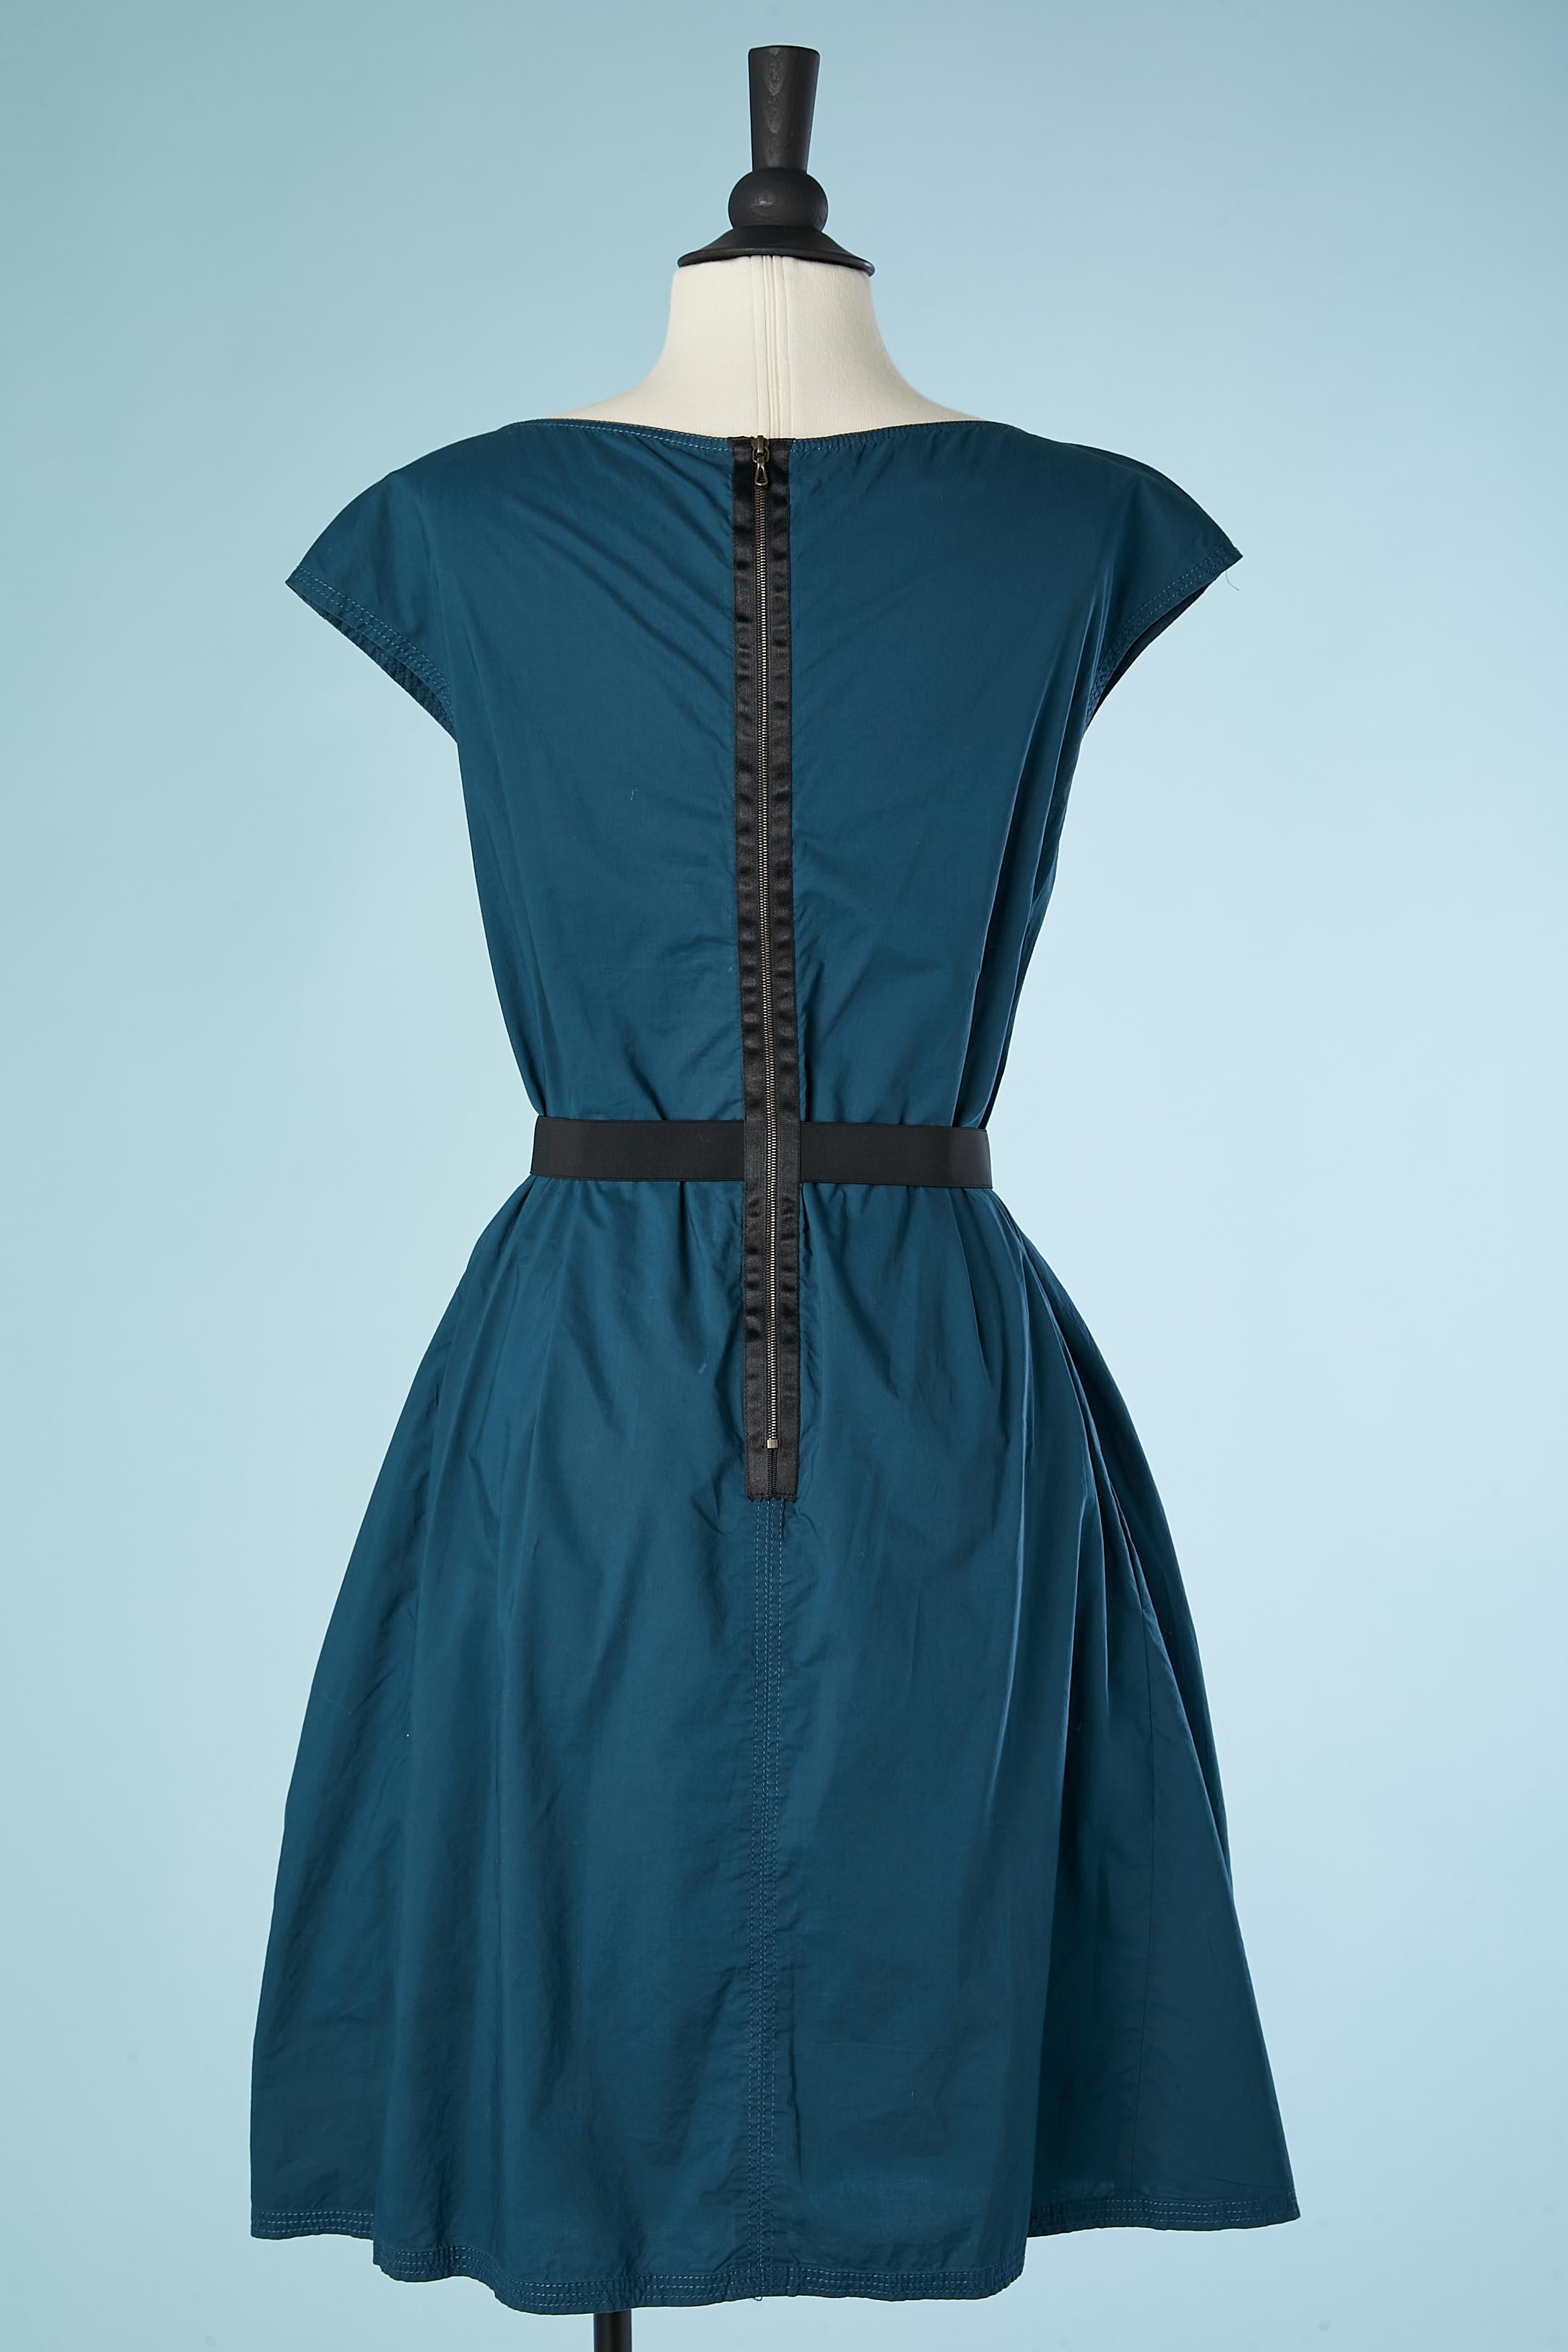 Blue cotton sleeveless dress with drape in the front Lanvin by Alber Elbaz For Sale 1